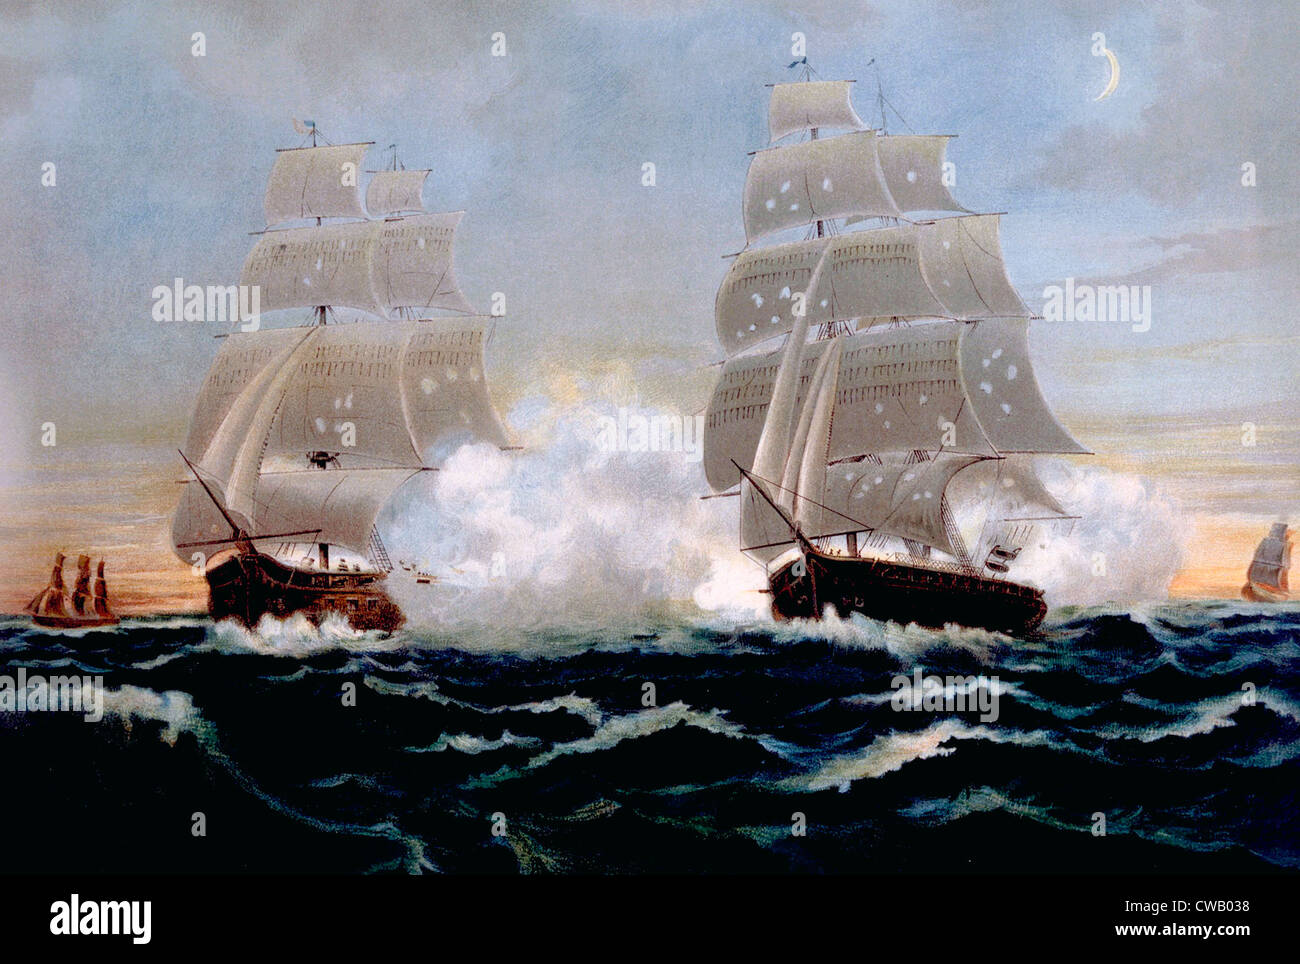 The War of 1812, U.S. and British frigates in battle, lithograph published 1899 Stock Photo